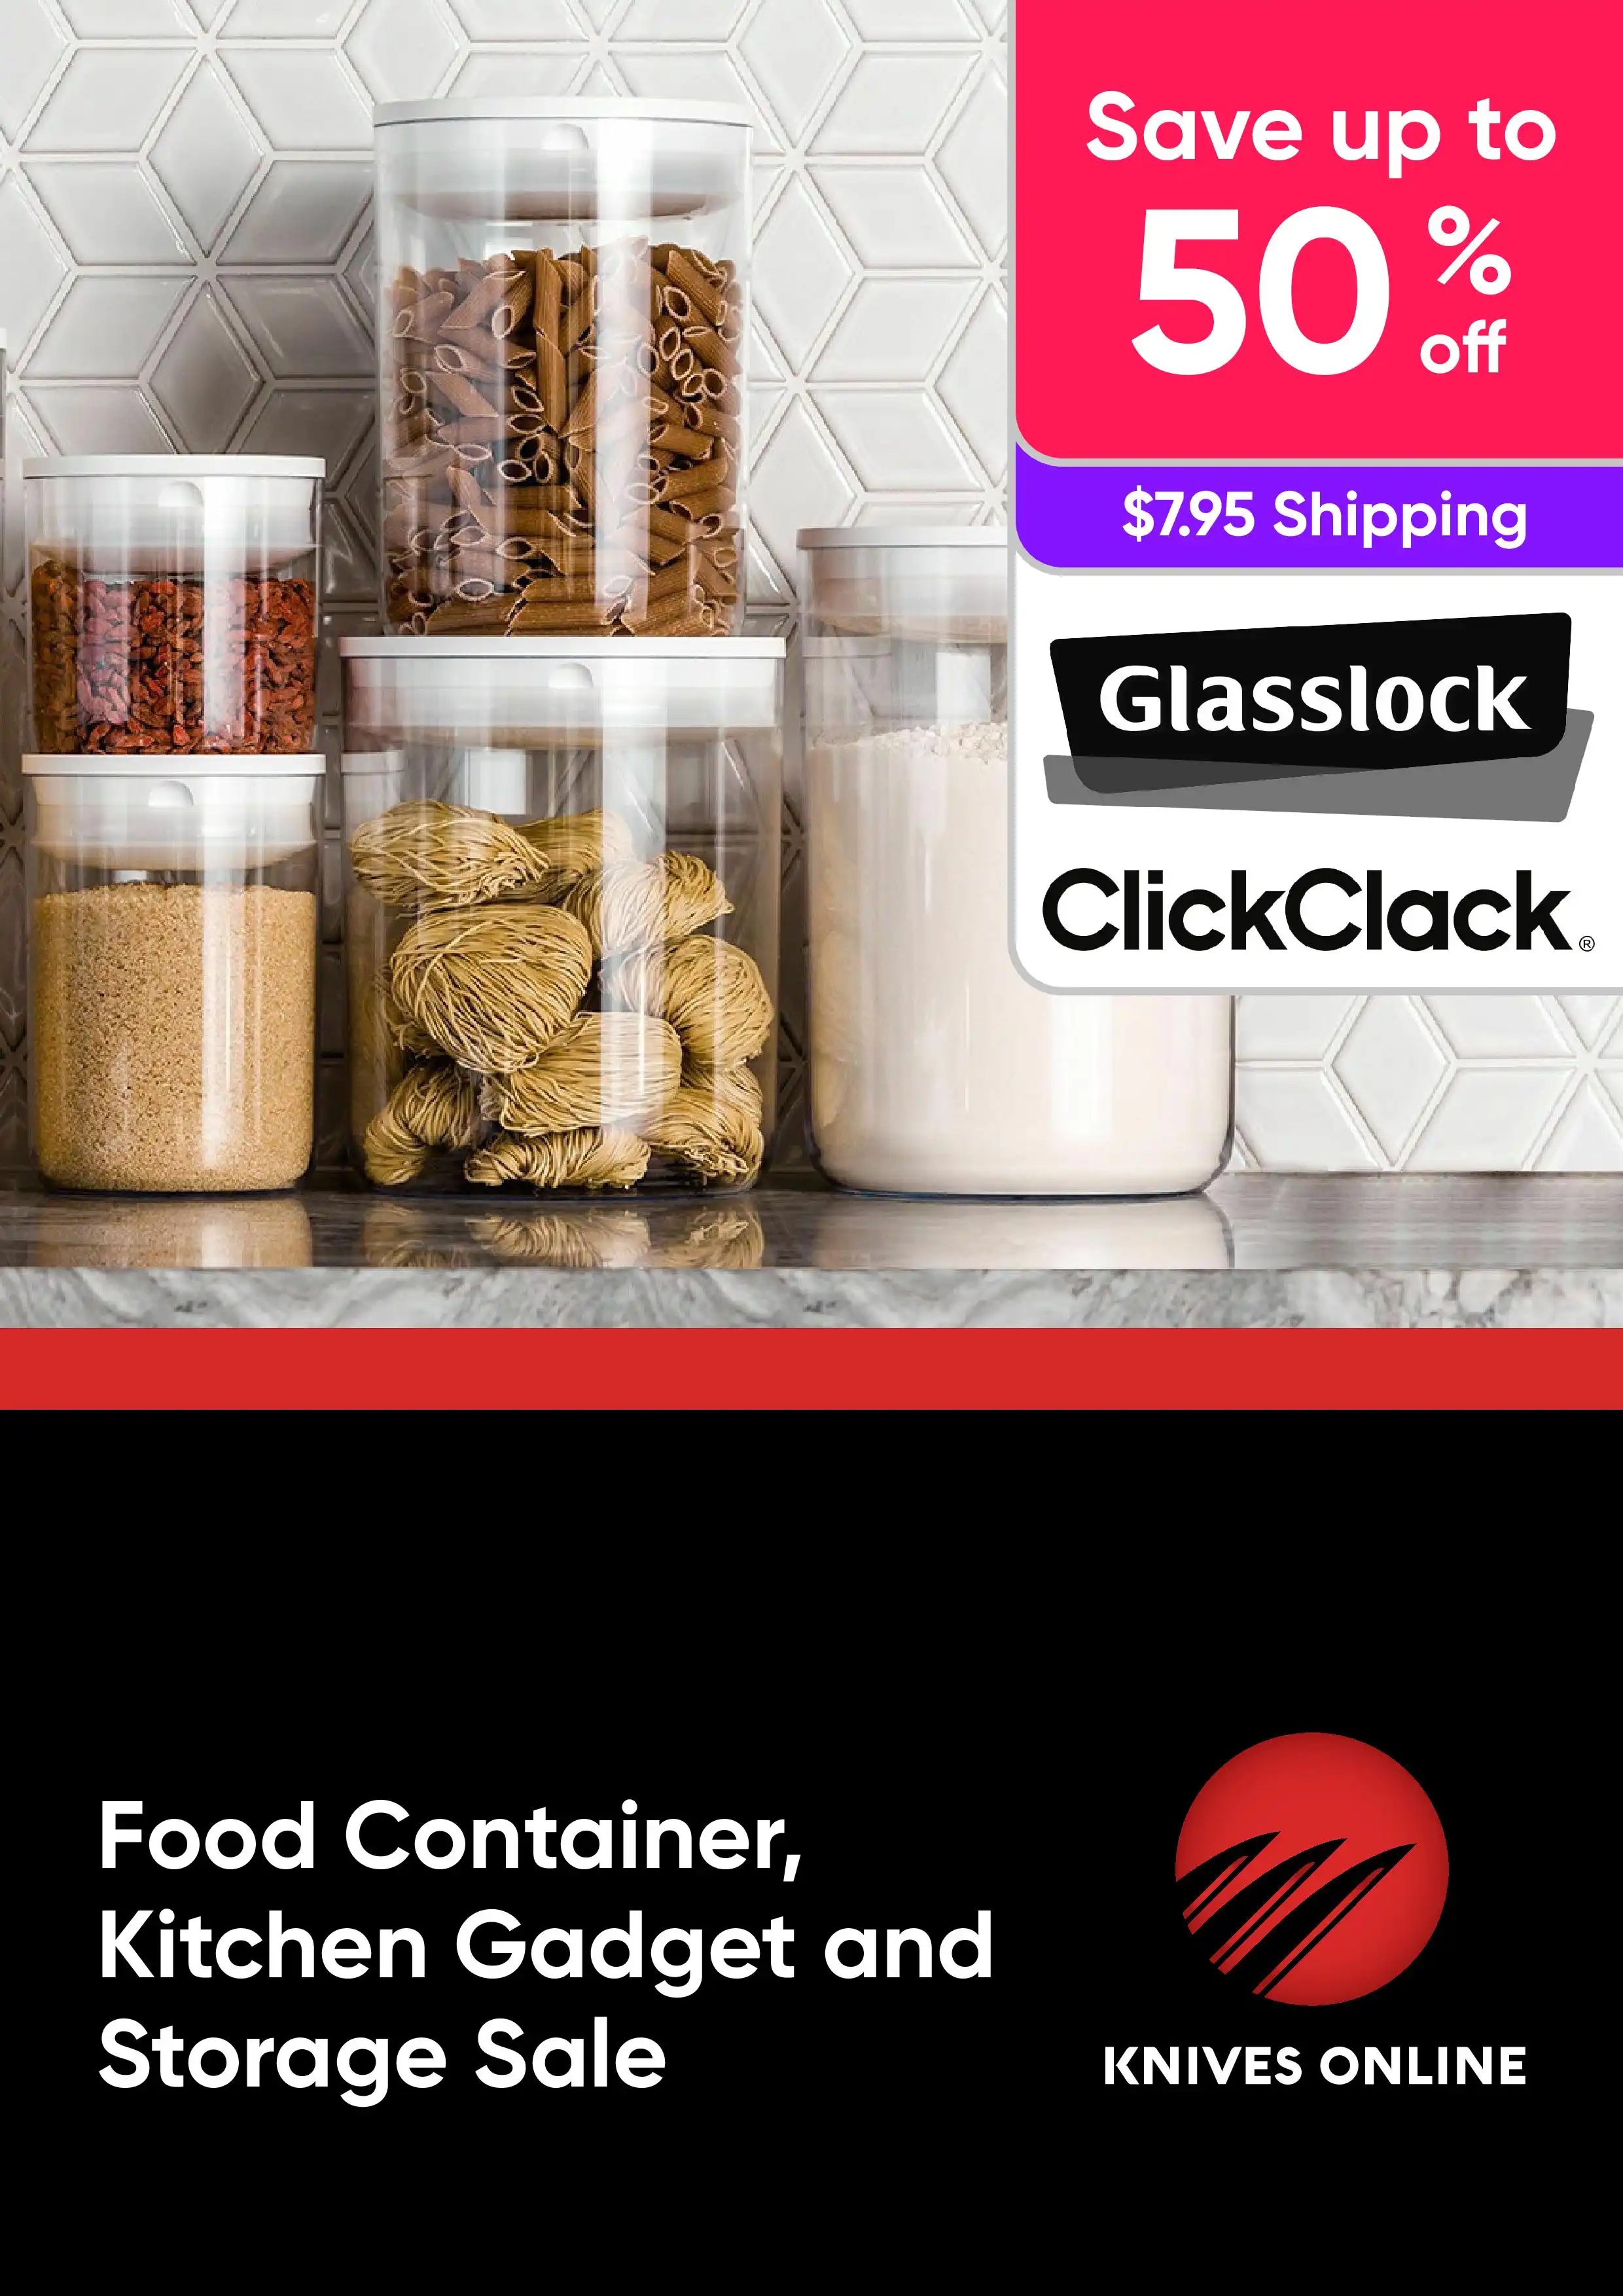 Food Containers, Kitchen Gadgets and Storage Sale - Glasslock, Clickclack - Up to 50% off